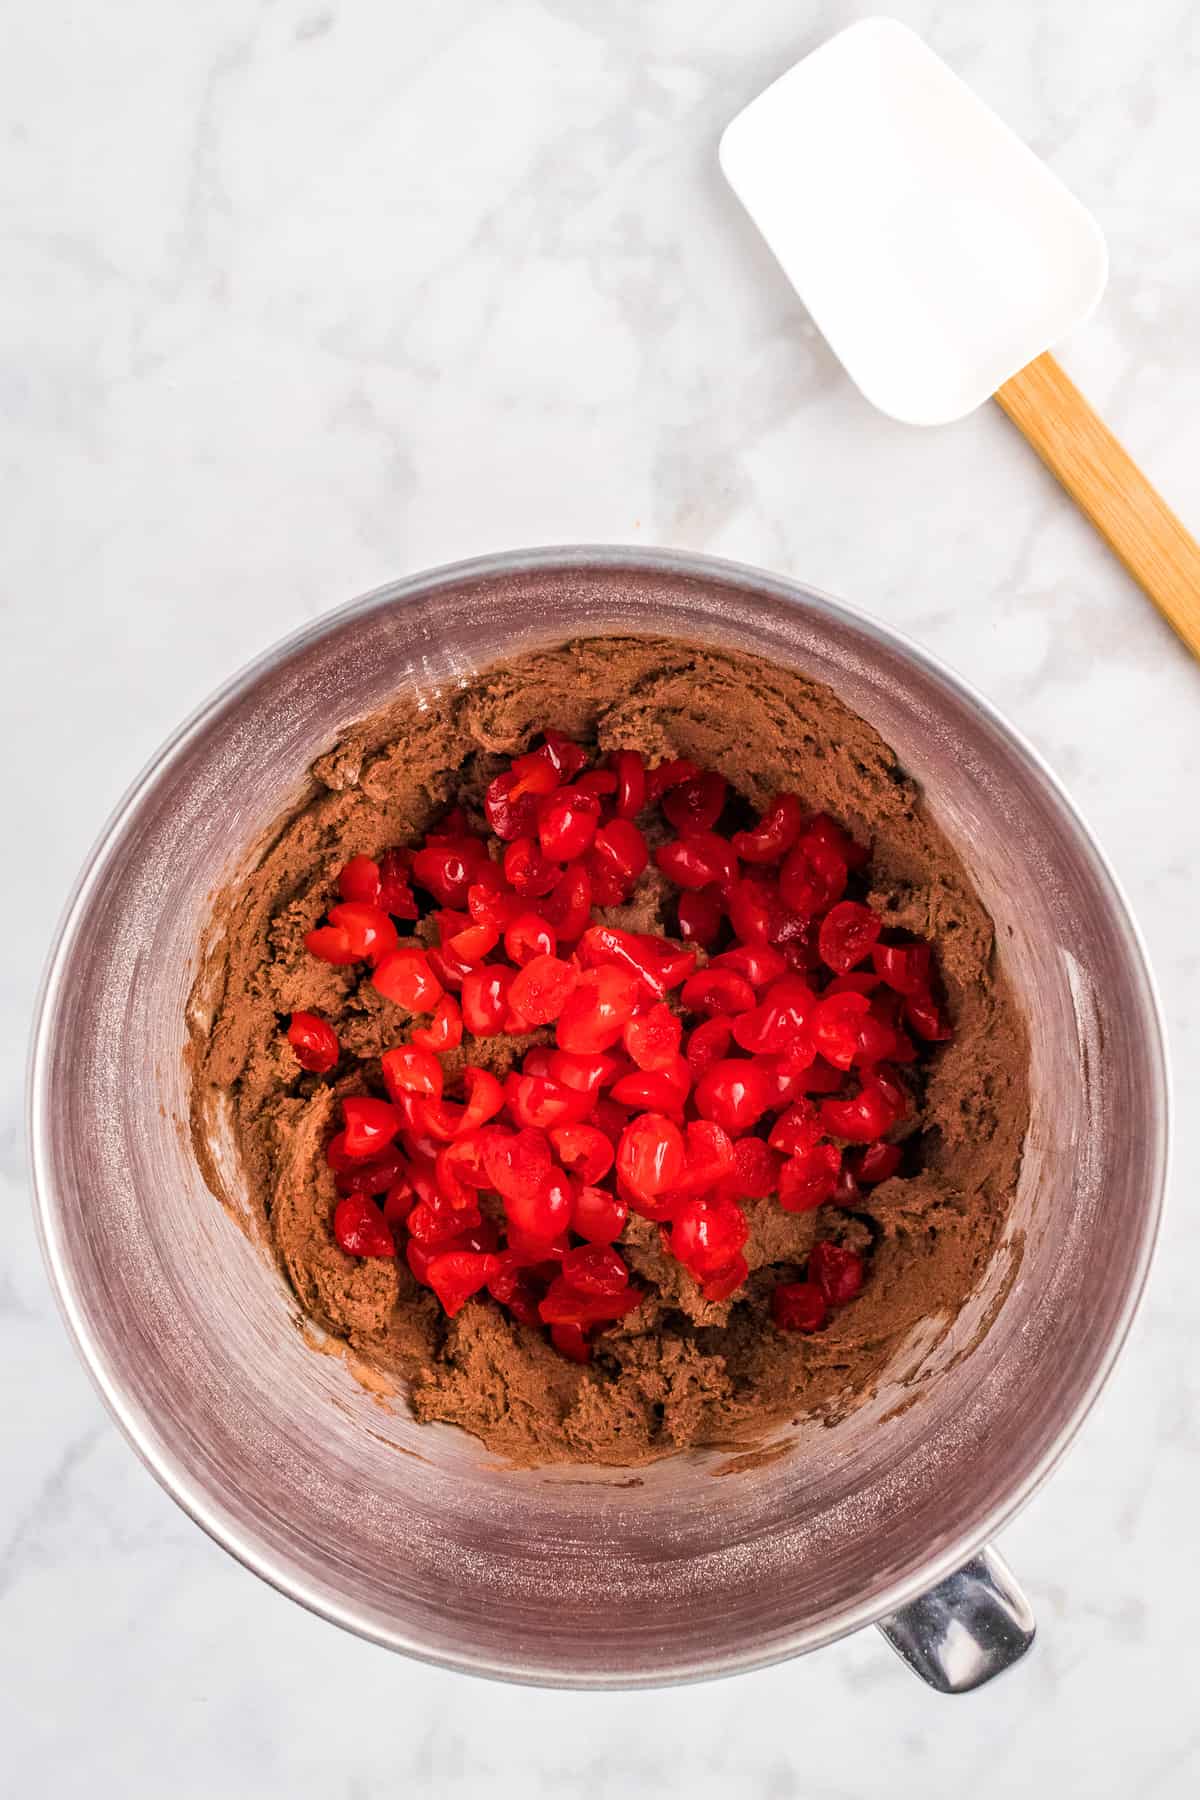 Overhead image of mixing bowl with chocolate cookie dough with chopped maraschino cherries